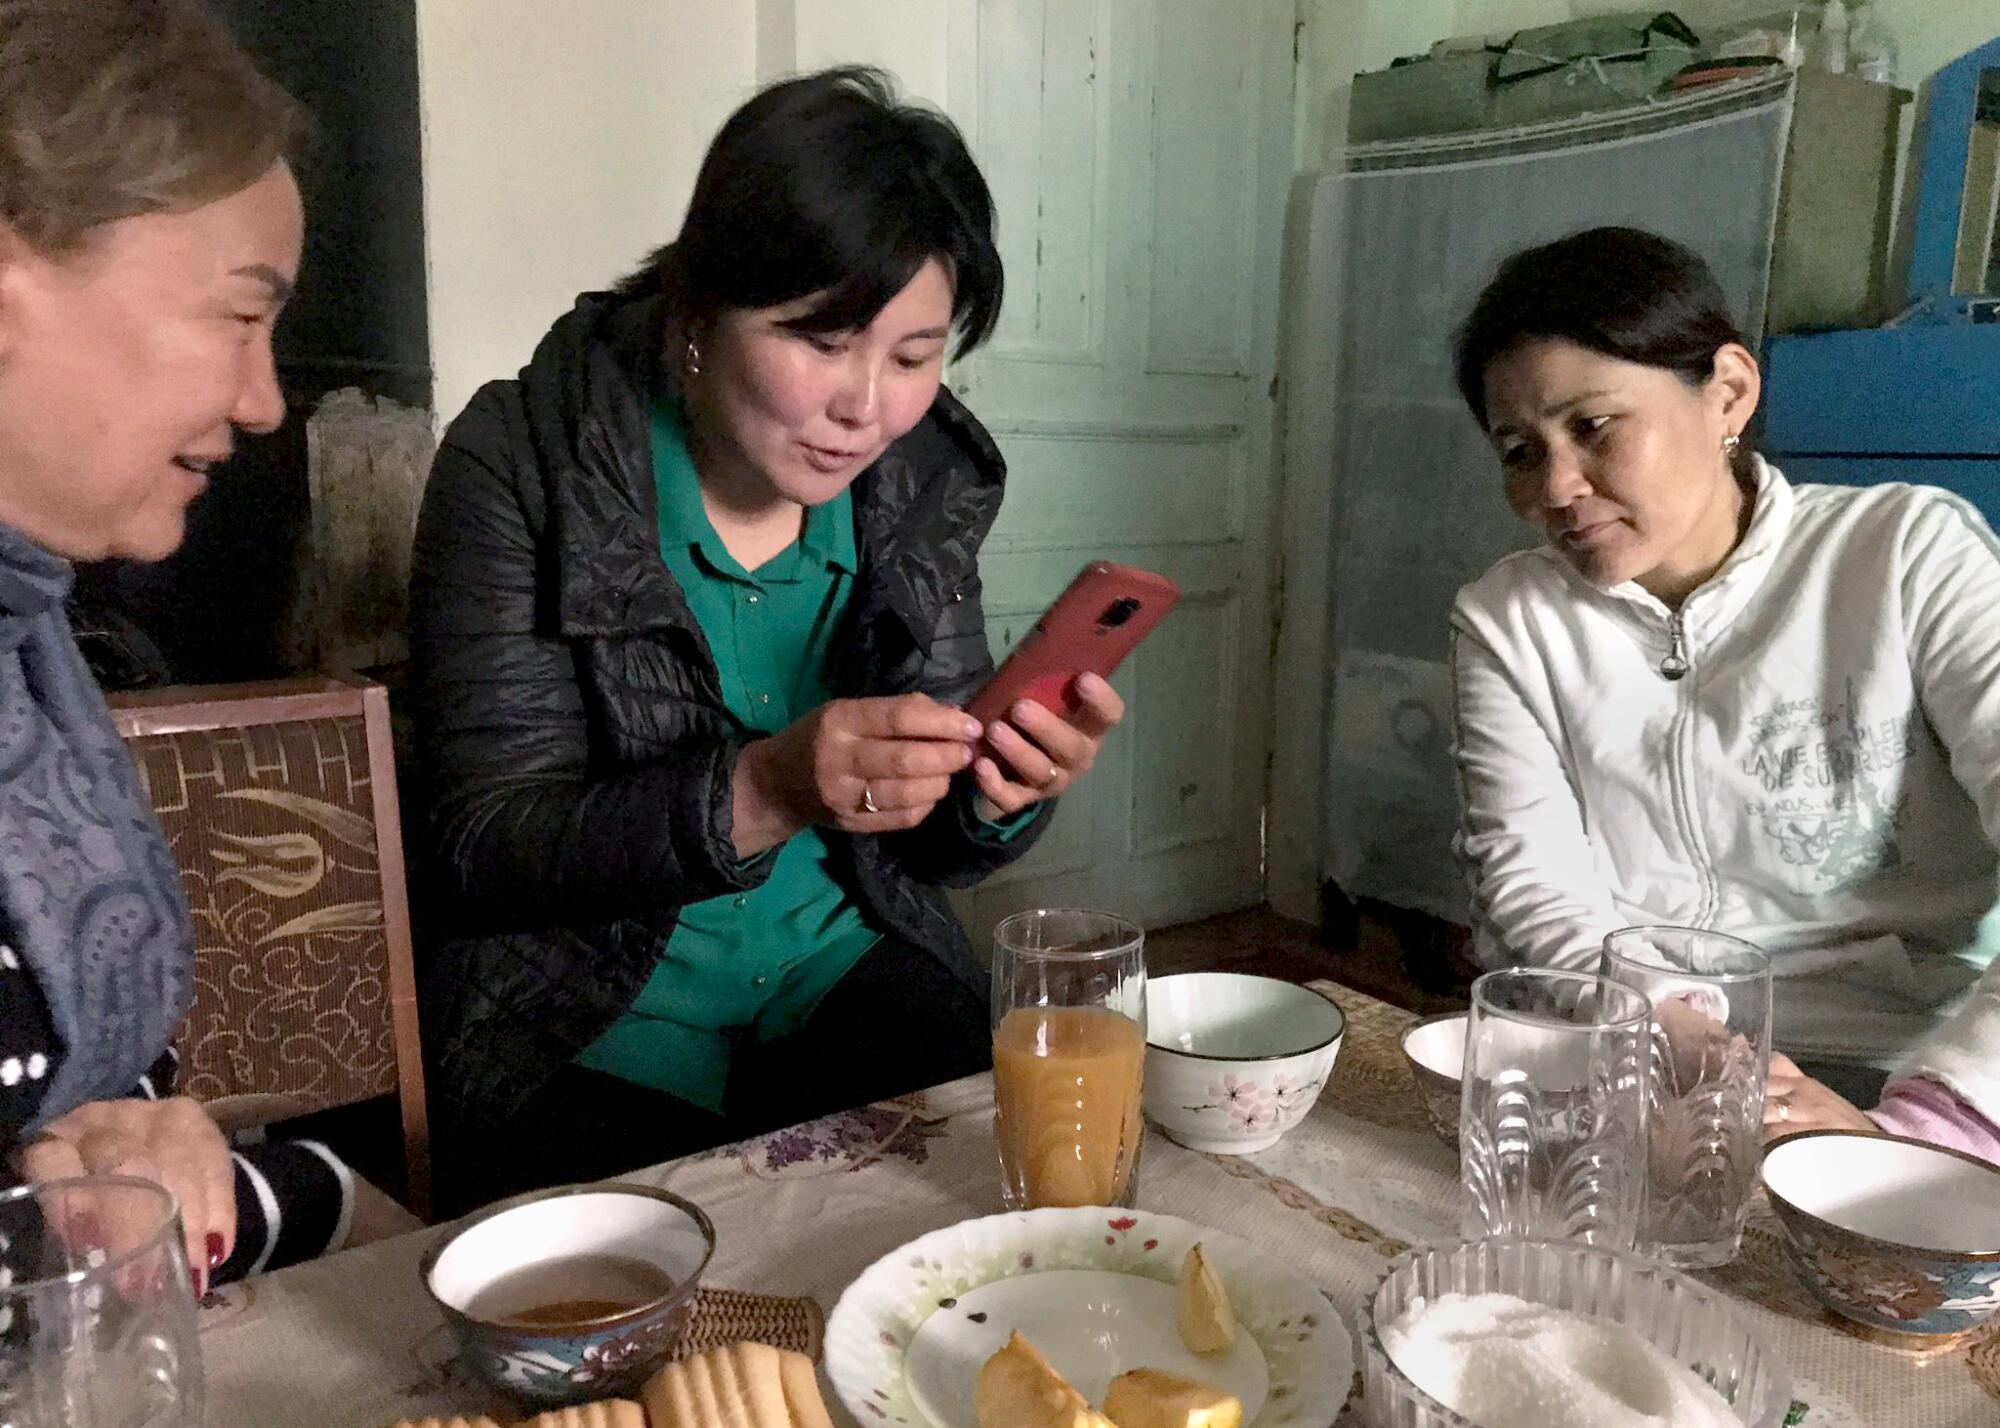 Three women sit at a kitchen table, looking at a phone, talking.